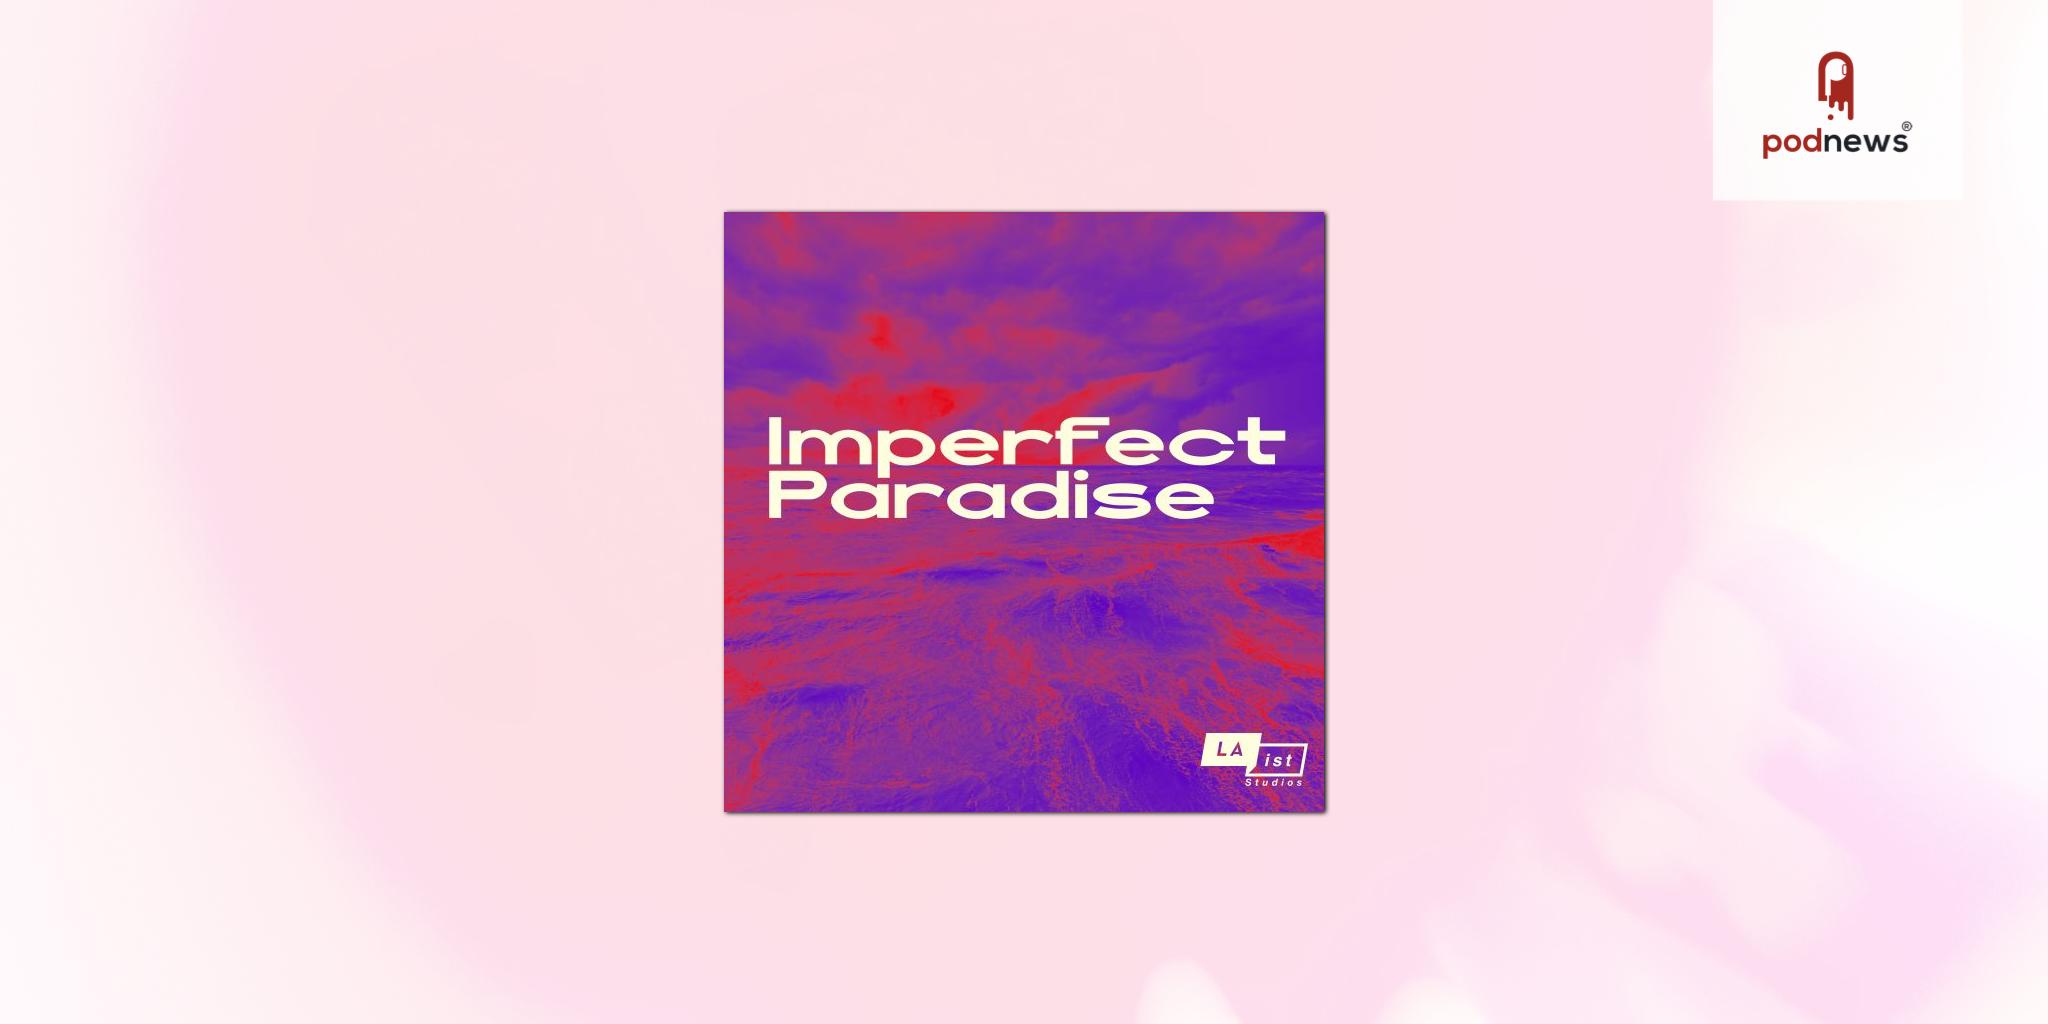 Imperfect Paradise, from LAist Studios, reveals new slate of long-form narrative stories